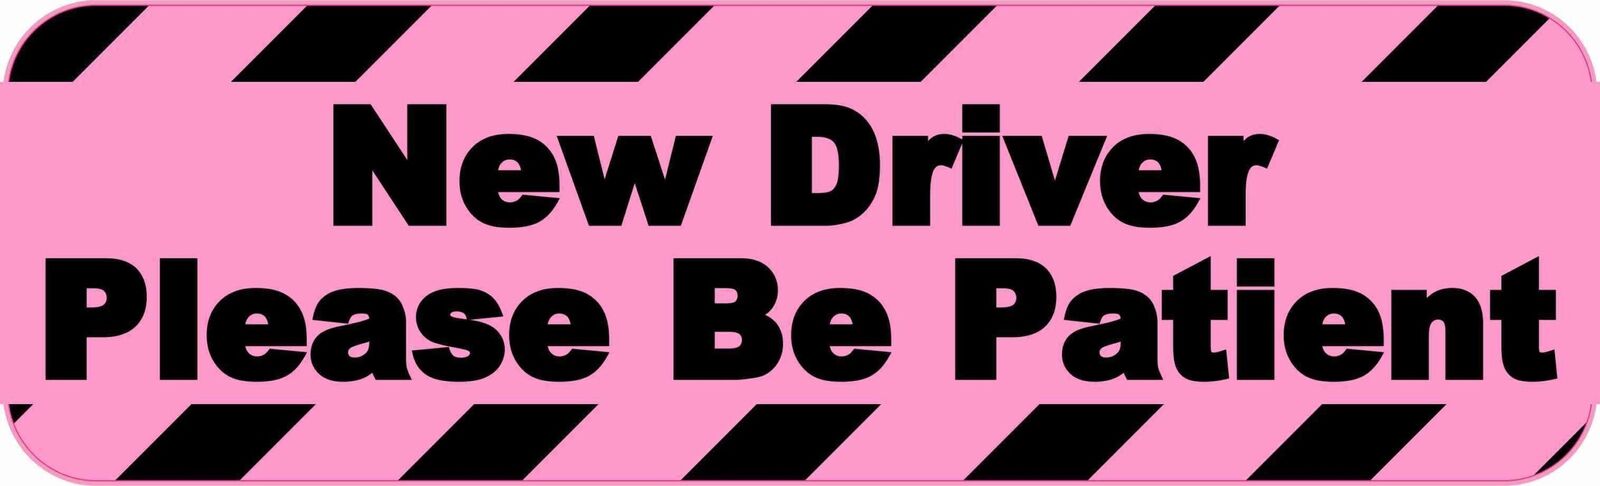 10x3 Pink New Driver Please Be Patient Magnet Magnetic Student Vehicle Car Sign